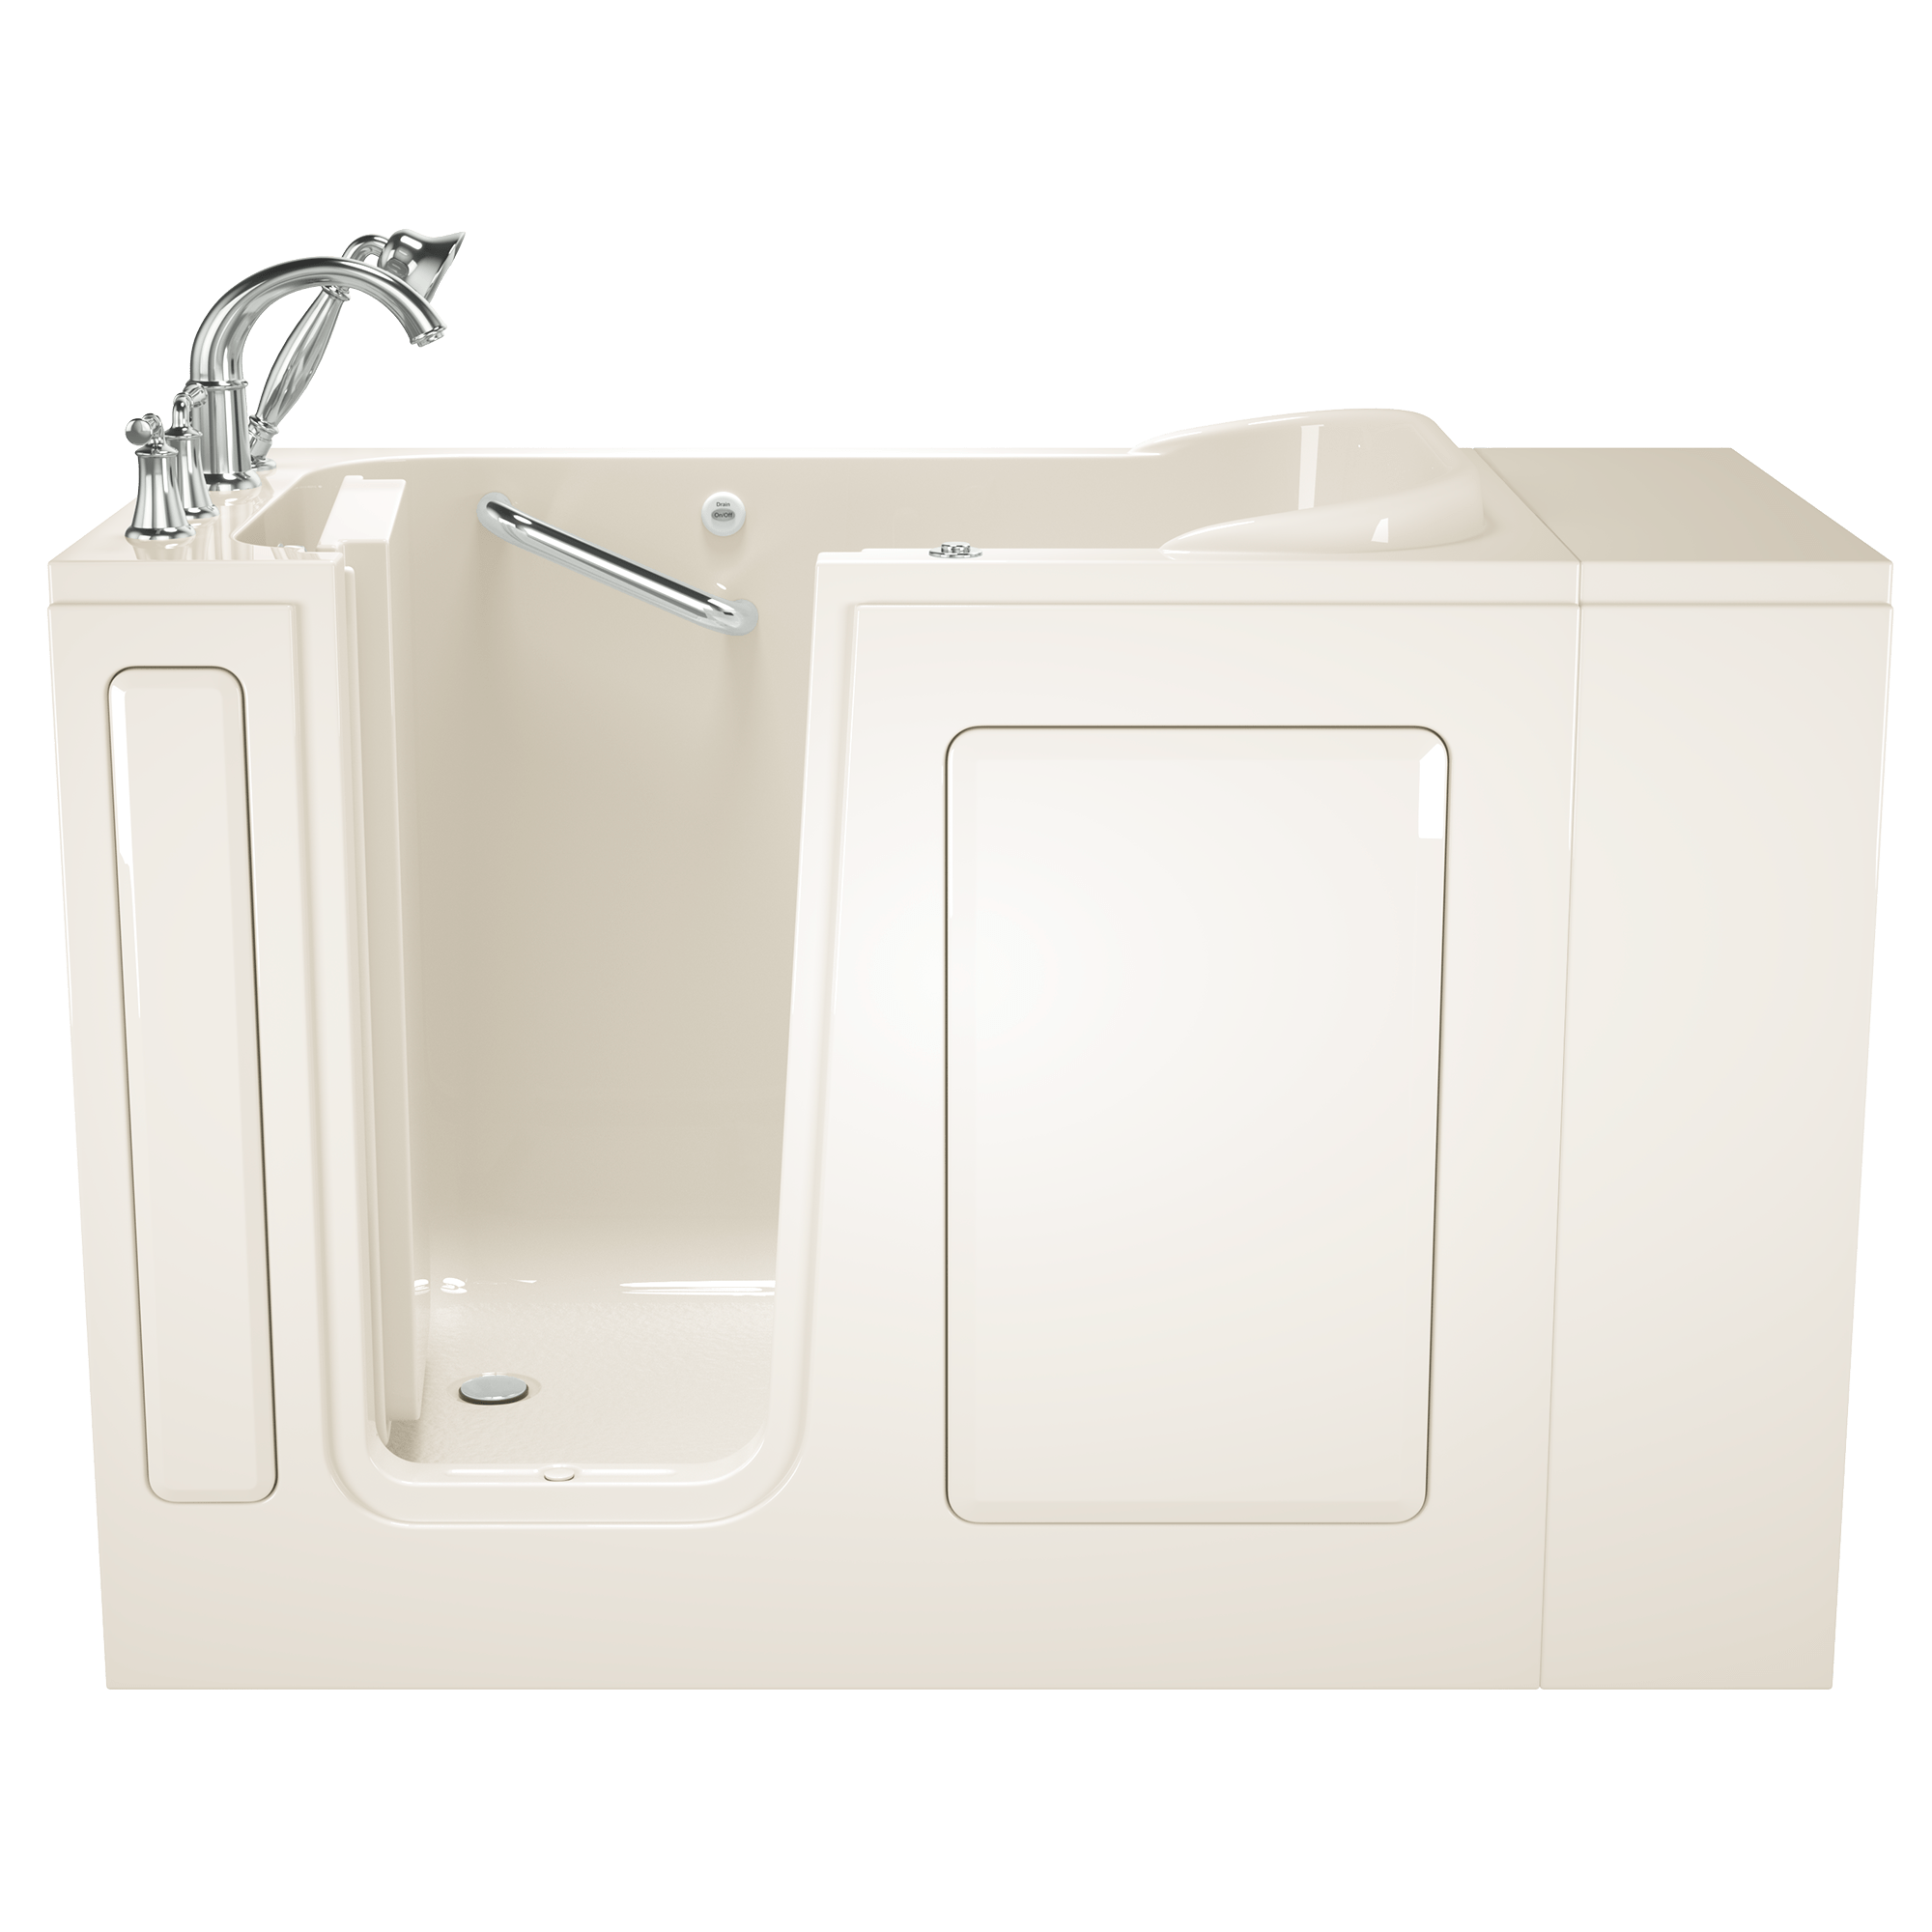 Gelcoat Value Series 28x48-Inch Walk-In Bathtub with Air Spa System  Left Hand Door and Drain